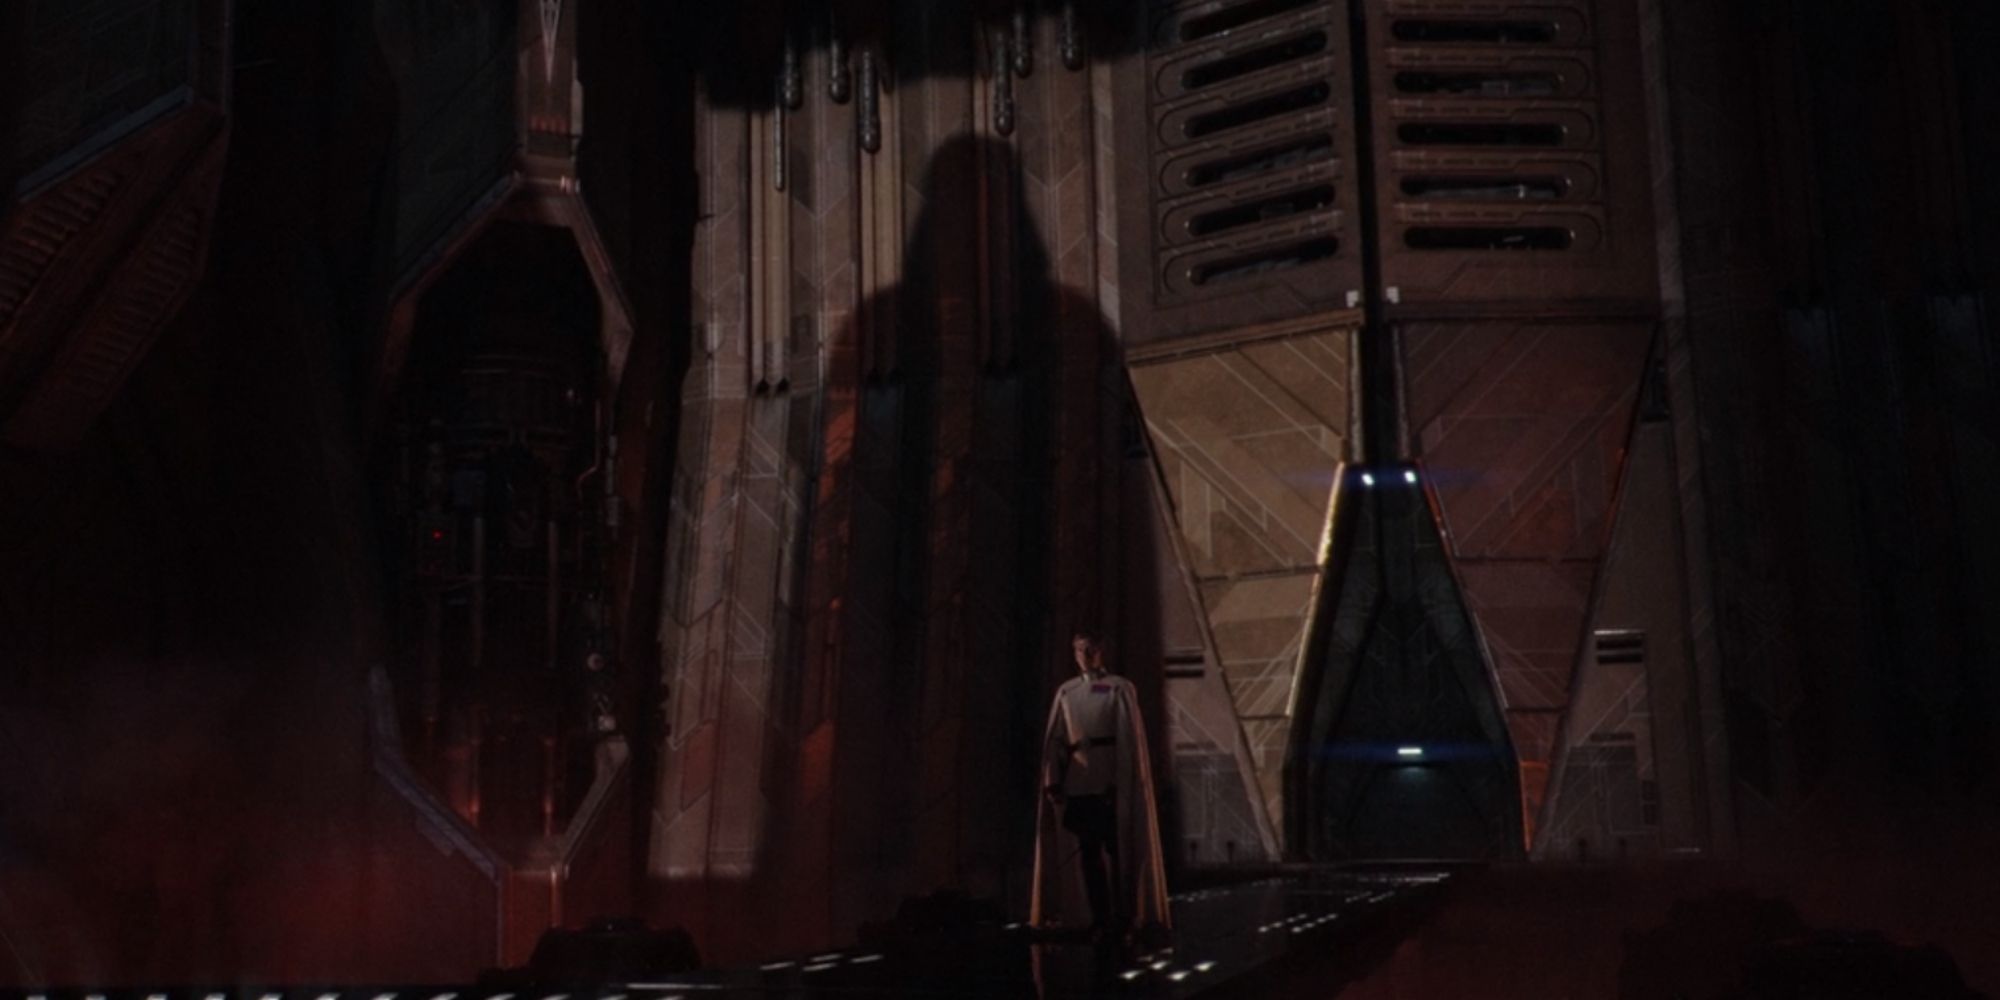 Darth Vaders shadow casting on the temple walls as Director Krennic watches in Rogue One A Star Wars Story